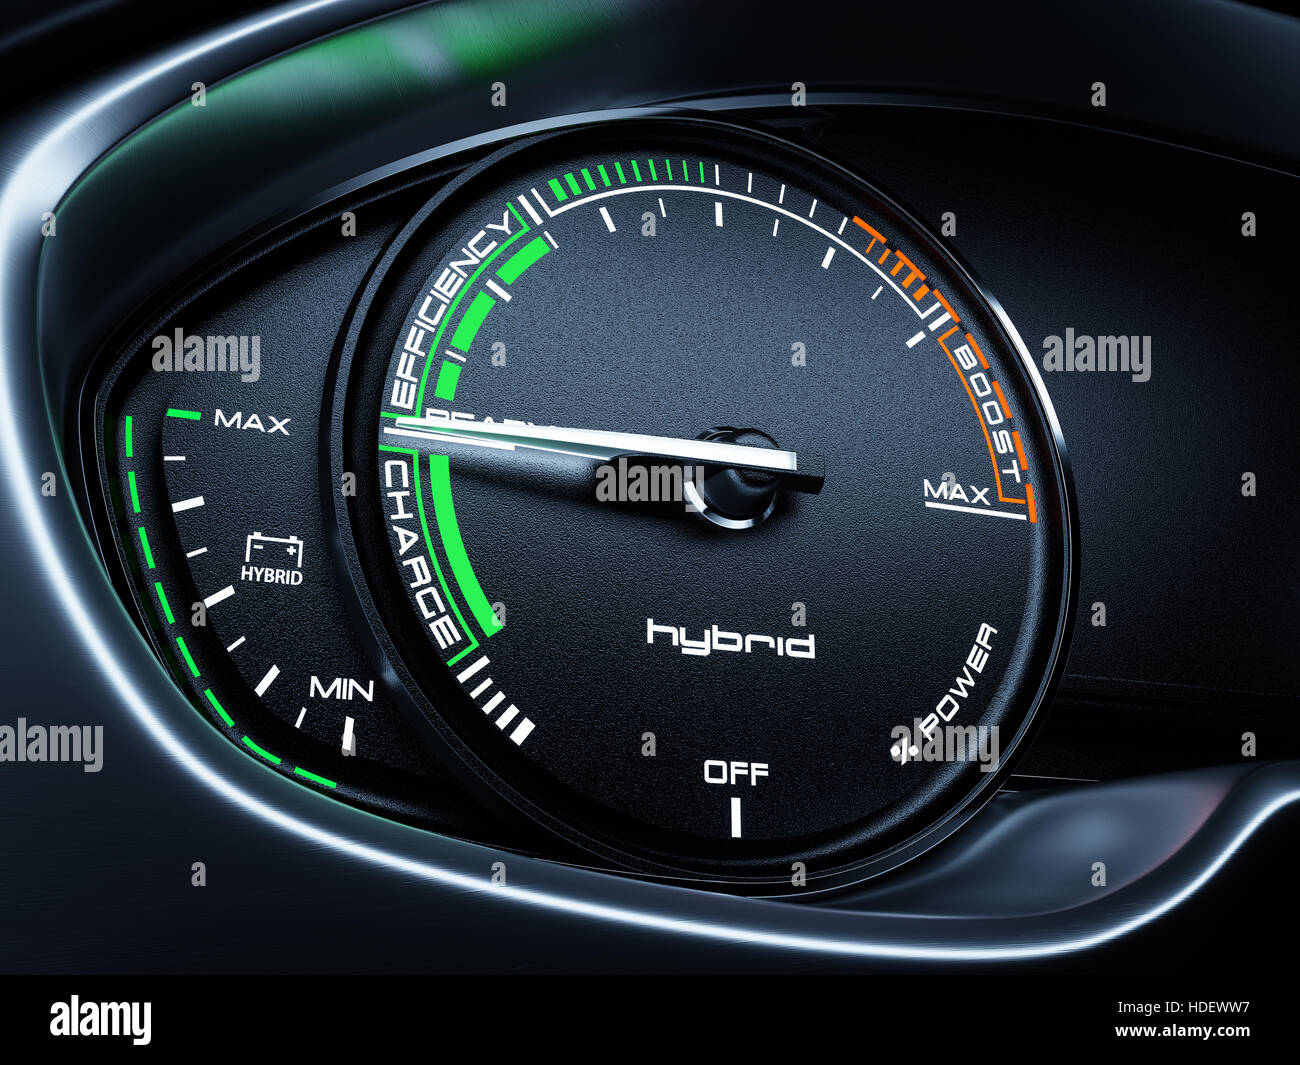 Hybrid car illuminated dashboard speedometer tachometer with full energy level and ready to drive mode. 3d renderin illustration Stock Photo